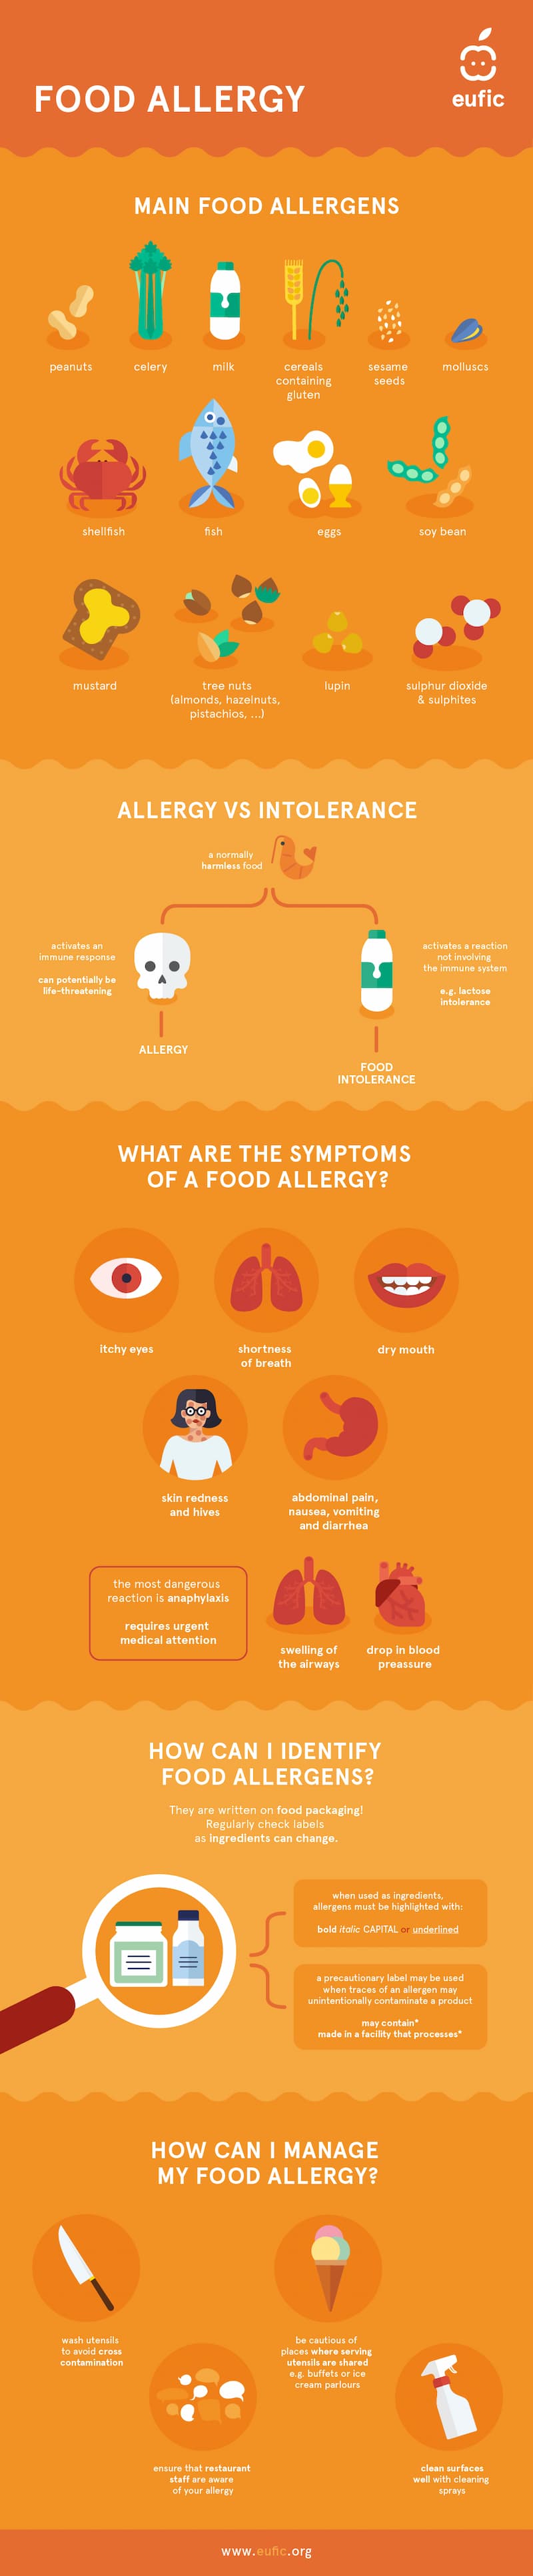 Common food allergies you need to know about